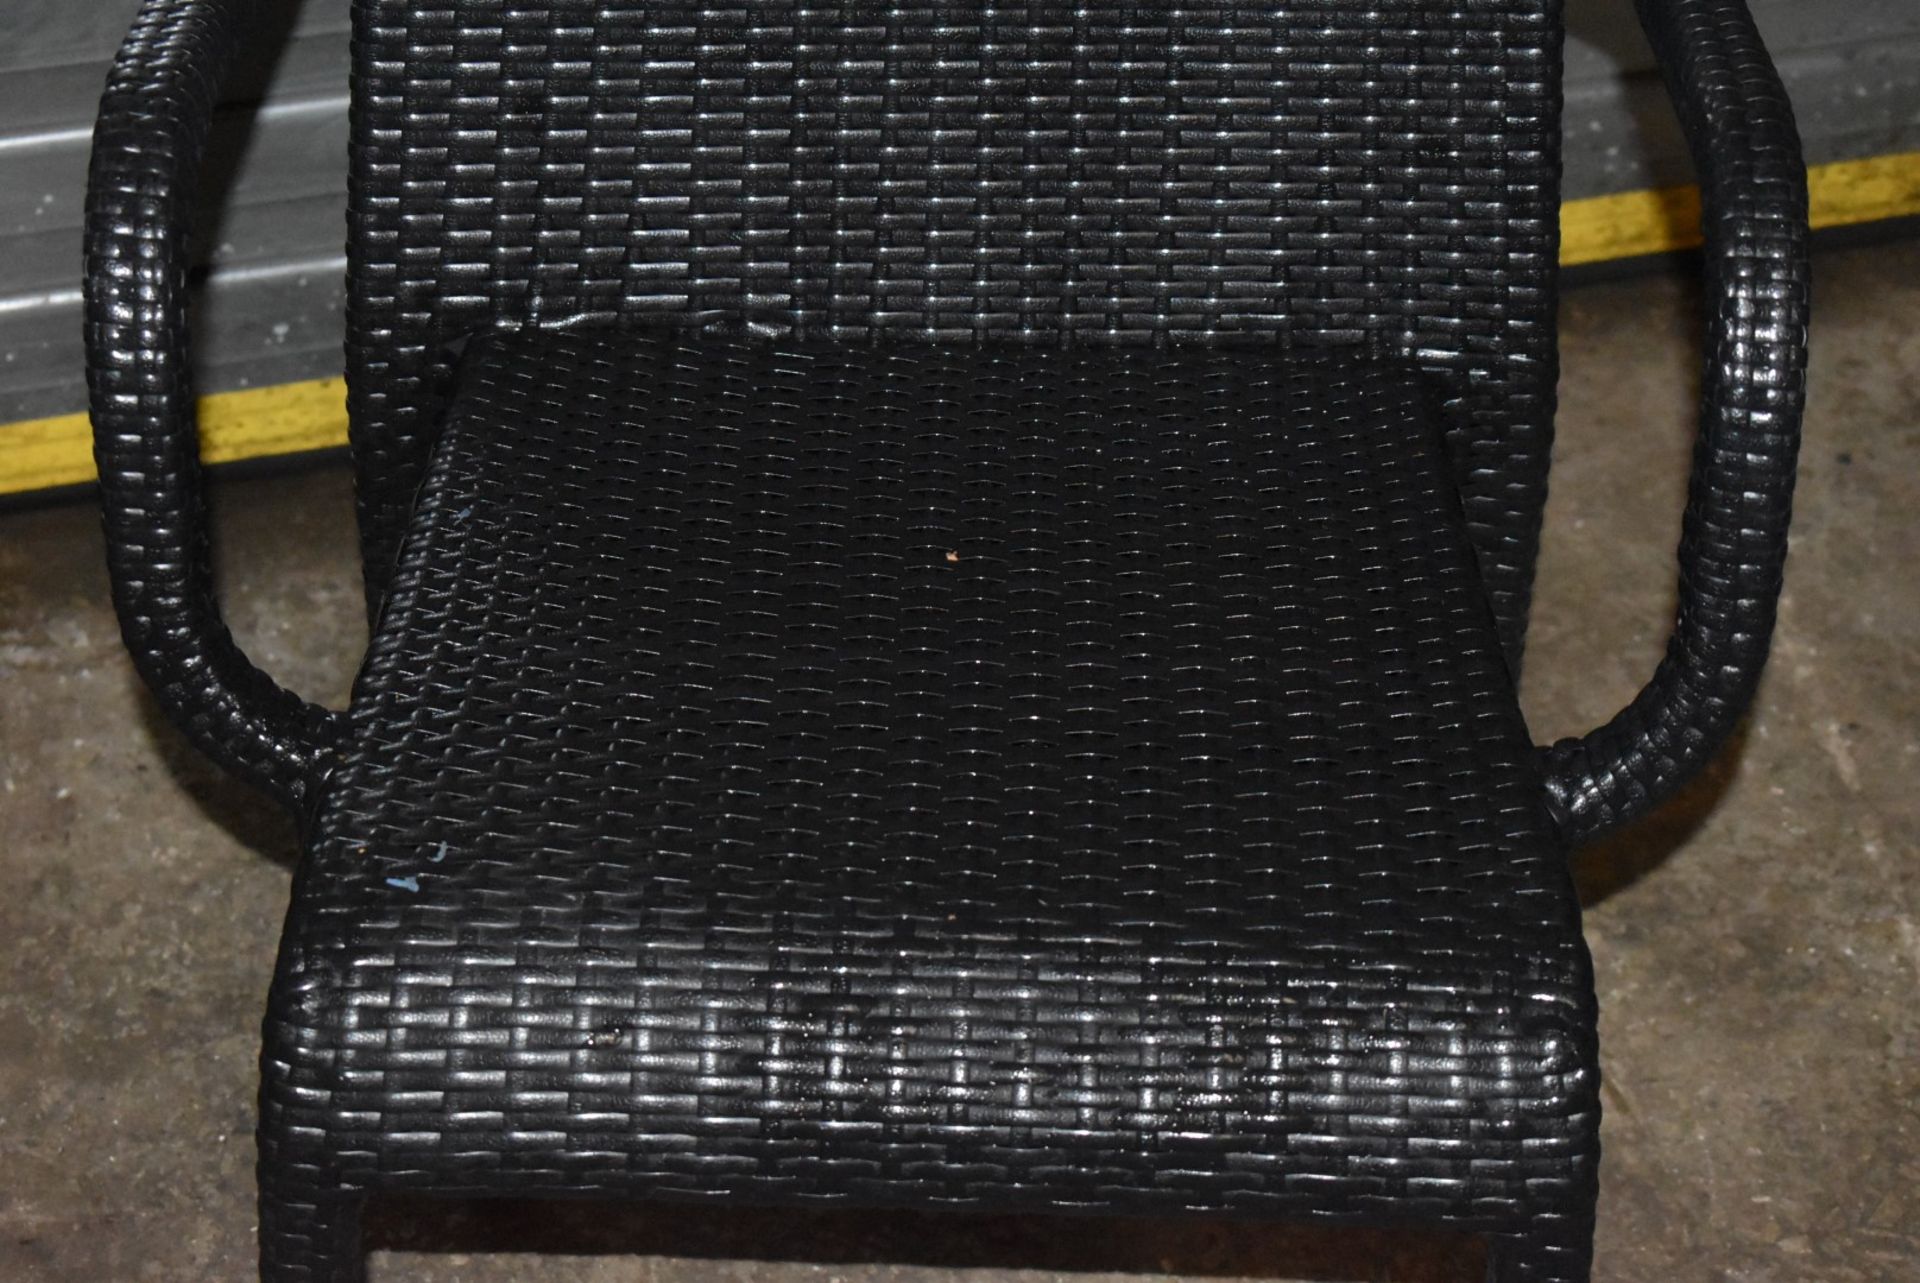 6 x Outdoor Stackable Rattan Chairs With Arm Rests - CL999 - Ref WH5 - Provided in Very Good - Image 8 of 9